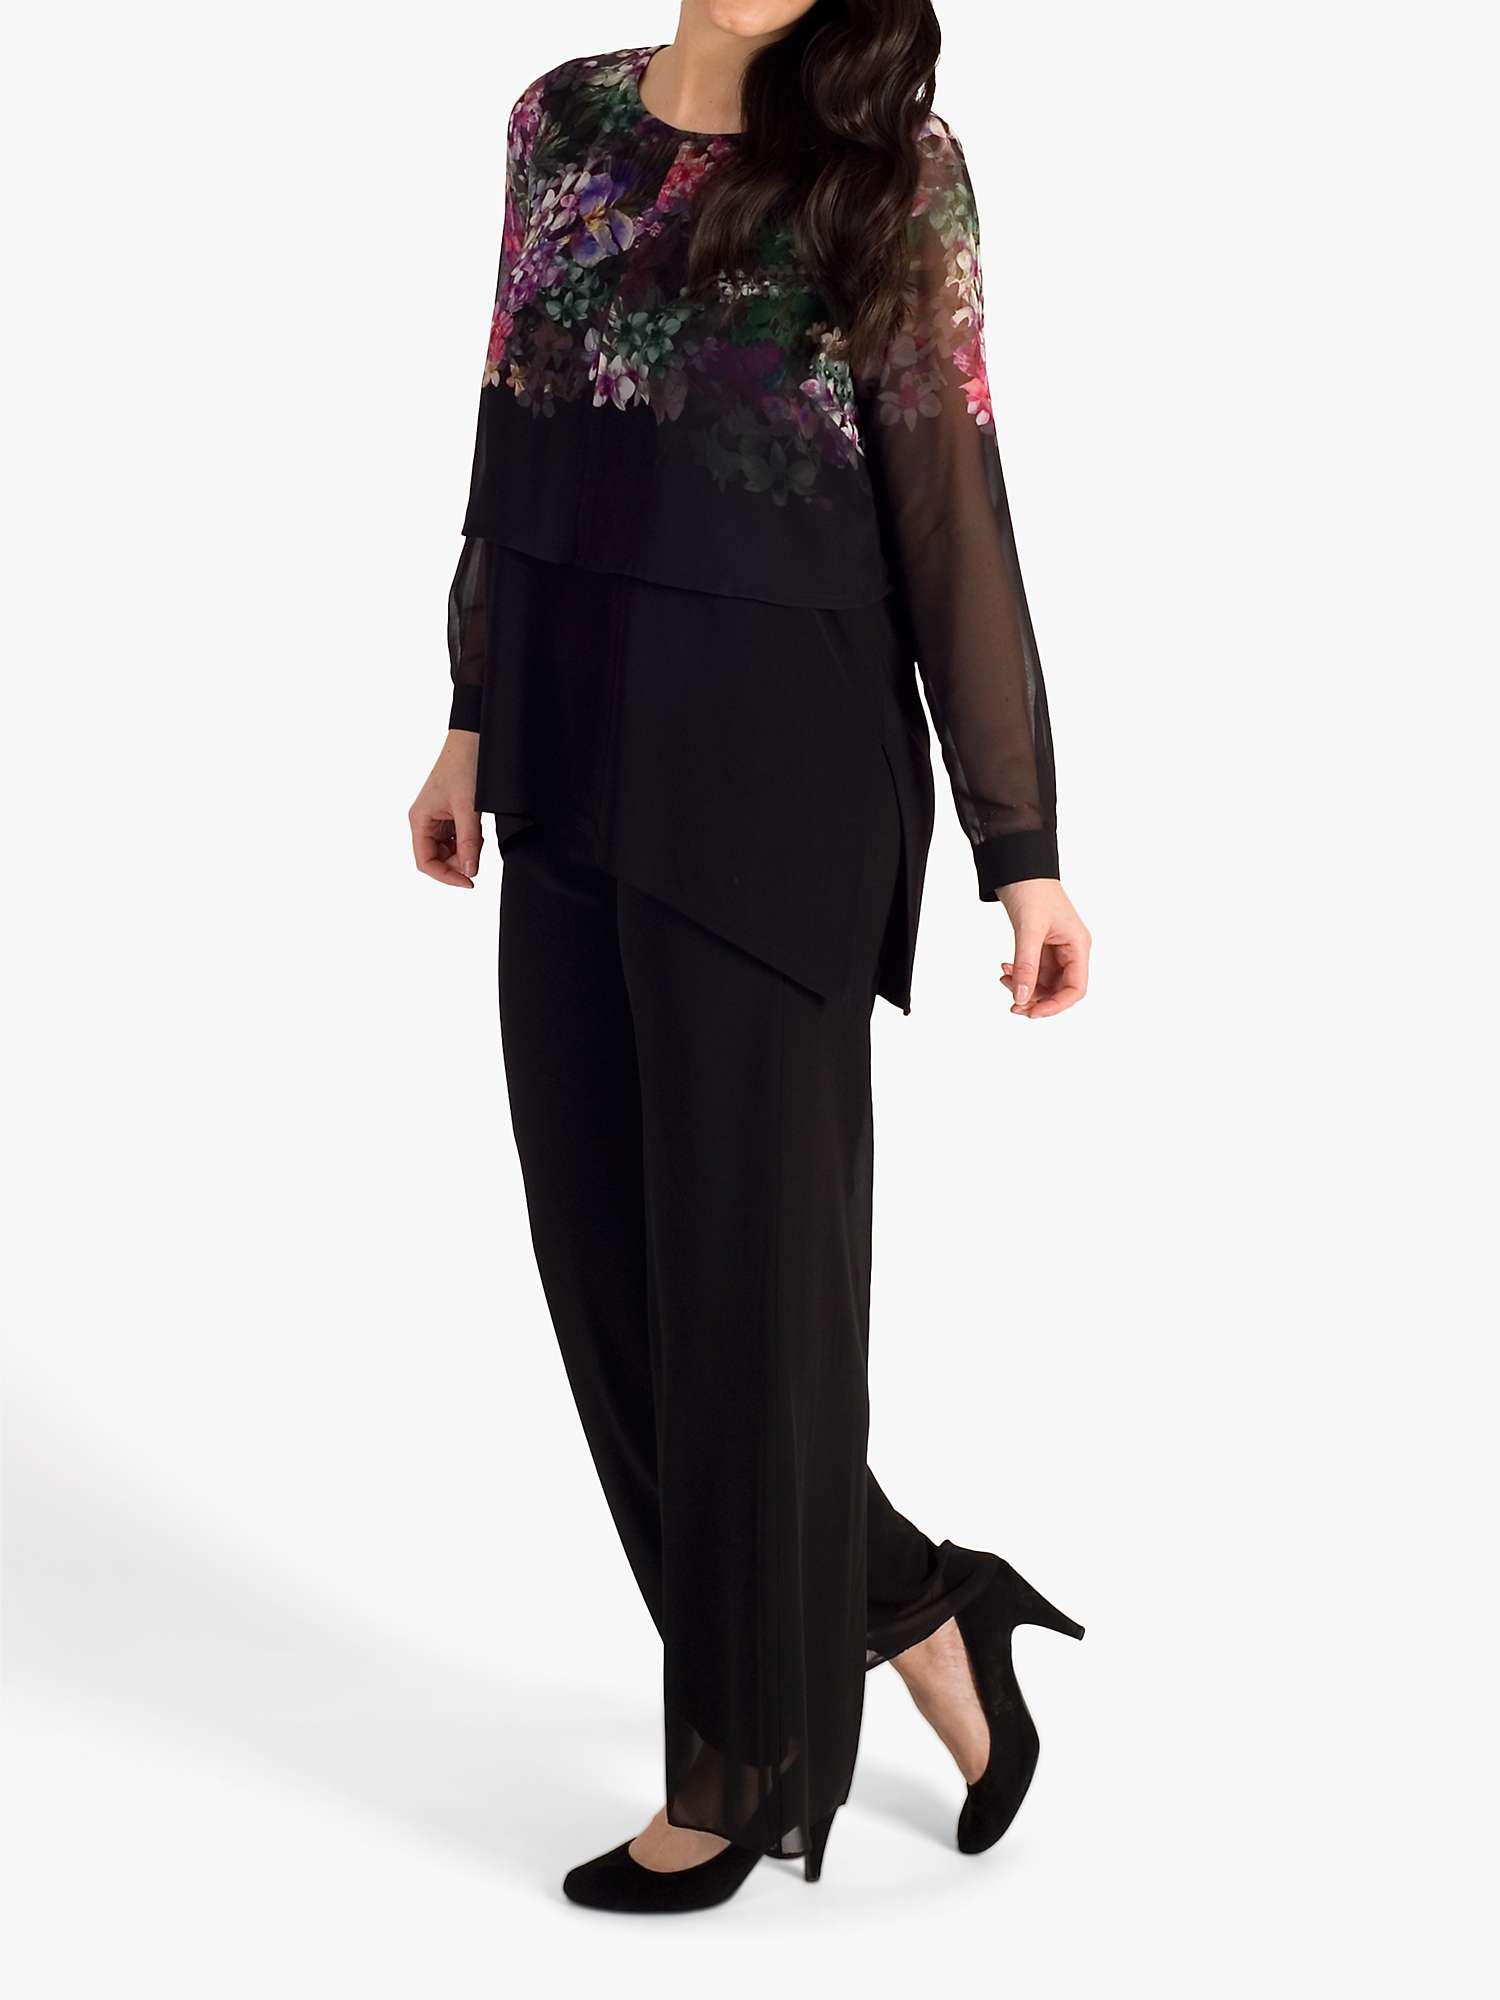 Buy chesca Wisteria Placement Print Double Layered Top, Black/Grape Online at johnlewis.com